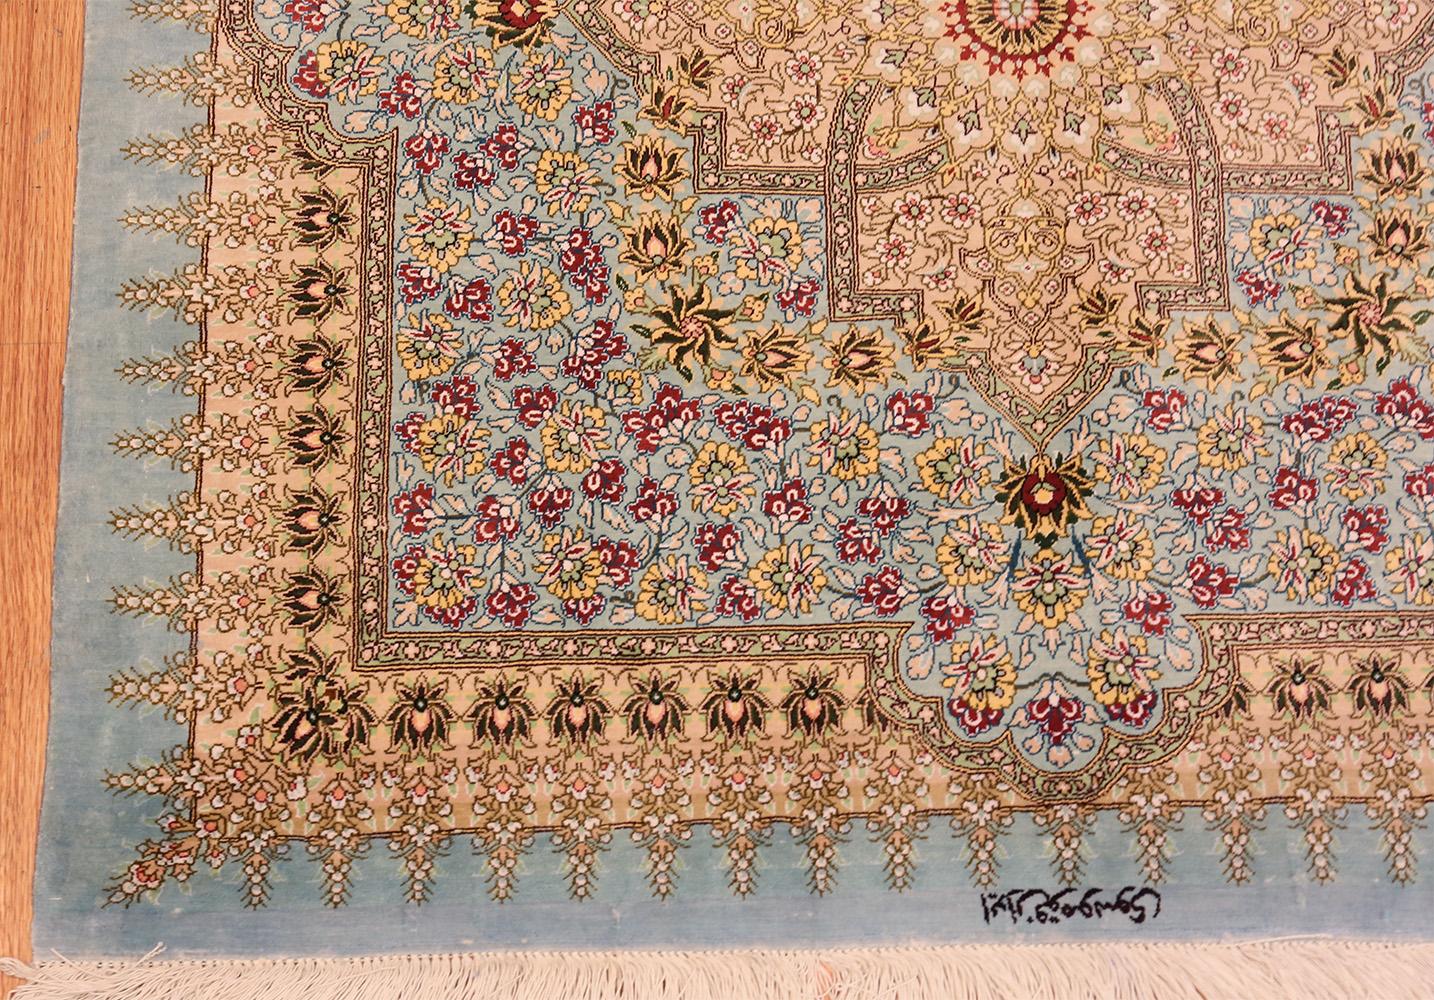 Hand-Knotted Beautiful Square Silk Vintage Persian Qum Rug. 3 ft 1 in x 3 ft 3 in